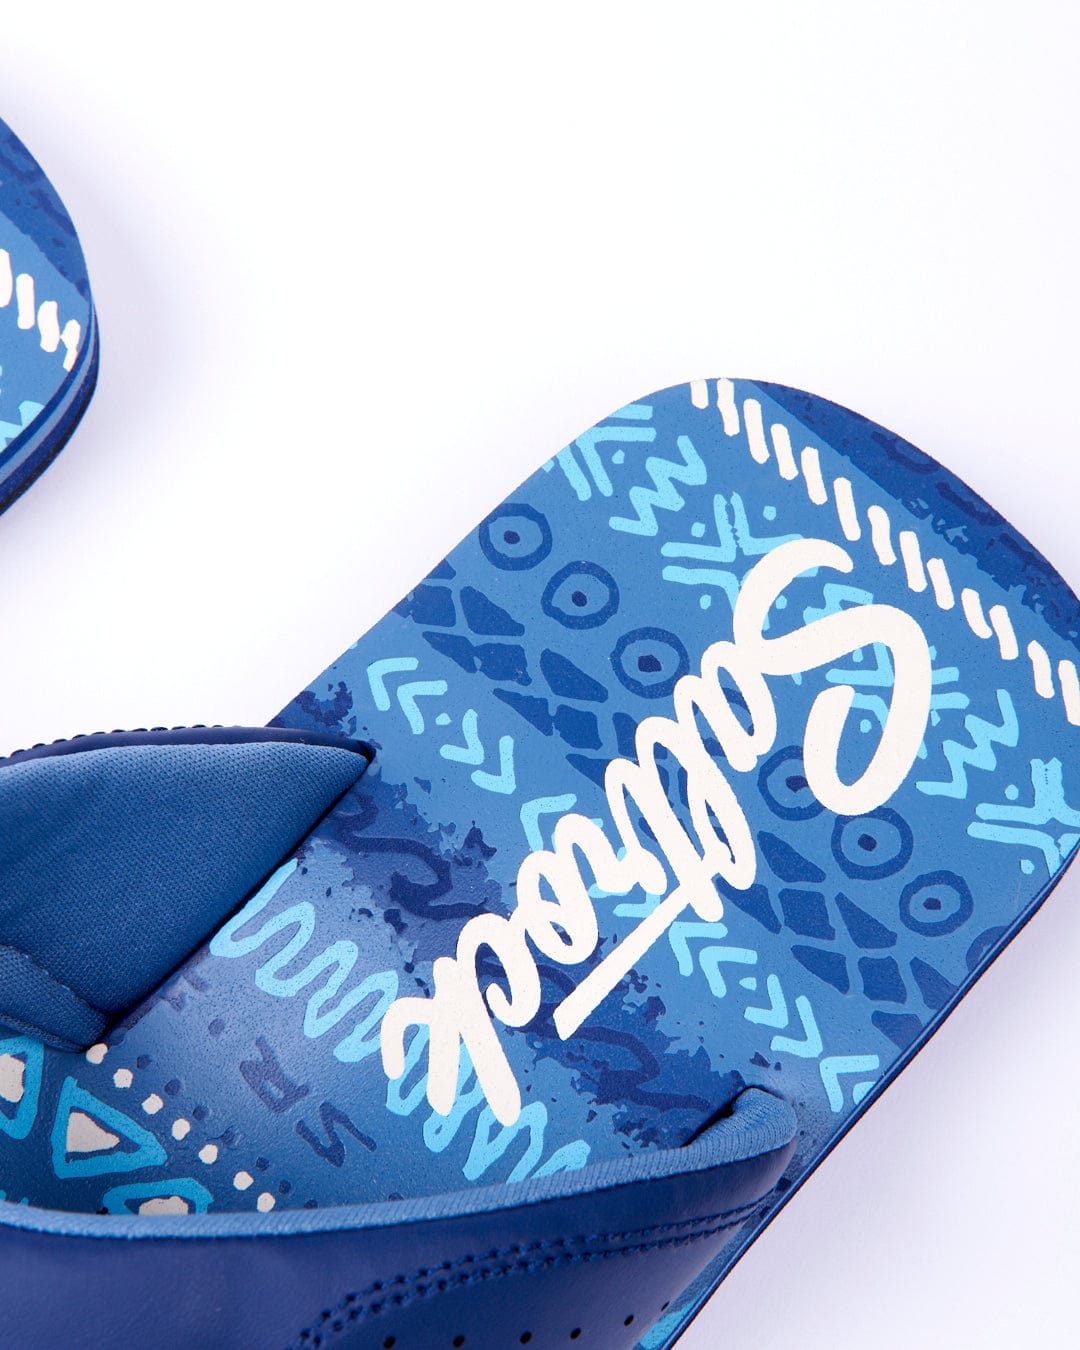 Close-up of a blue Marks - Mens flip-flop with an all-over print and the Saltrock brand name visible on the insole.